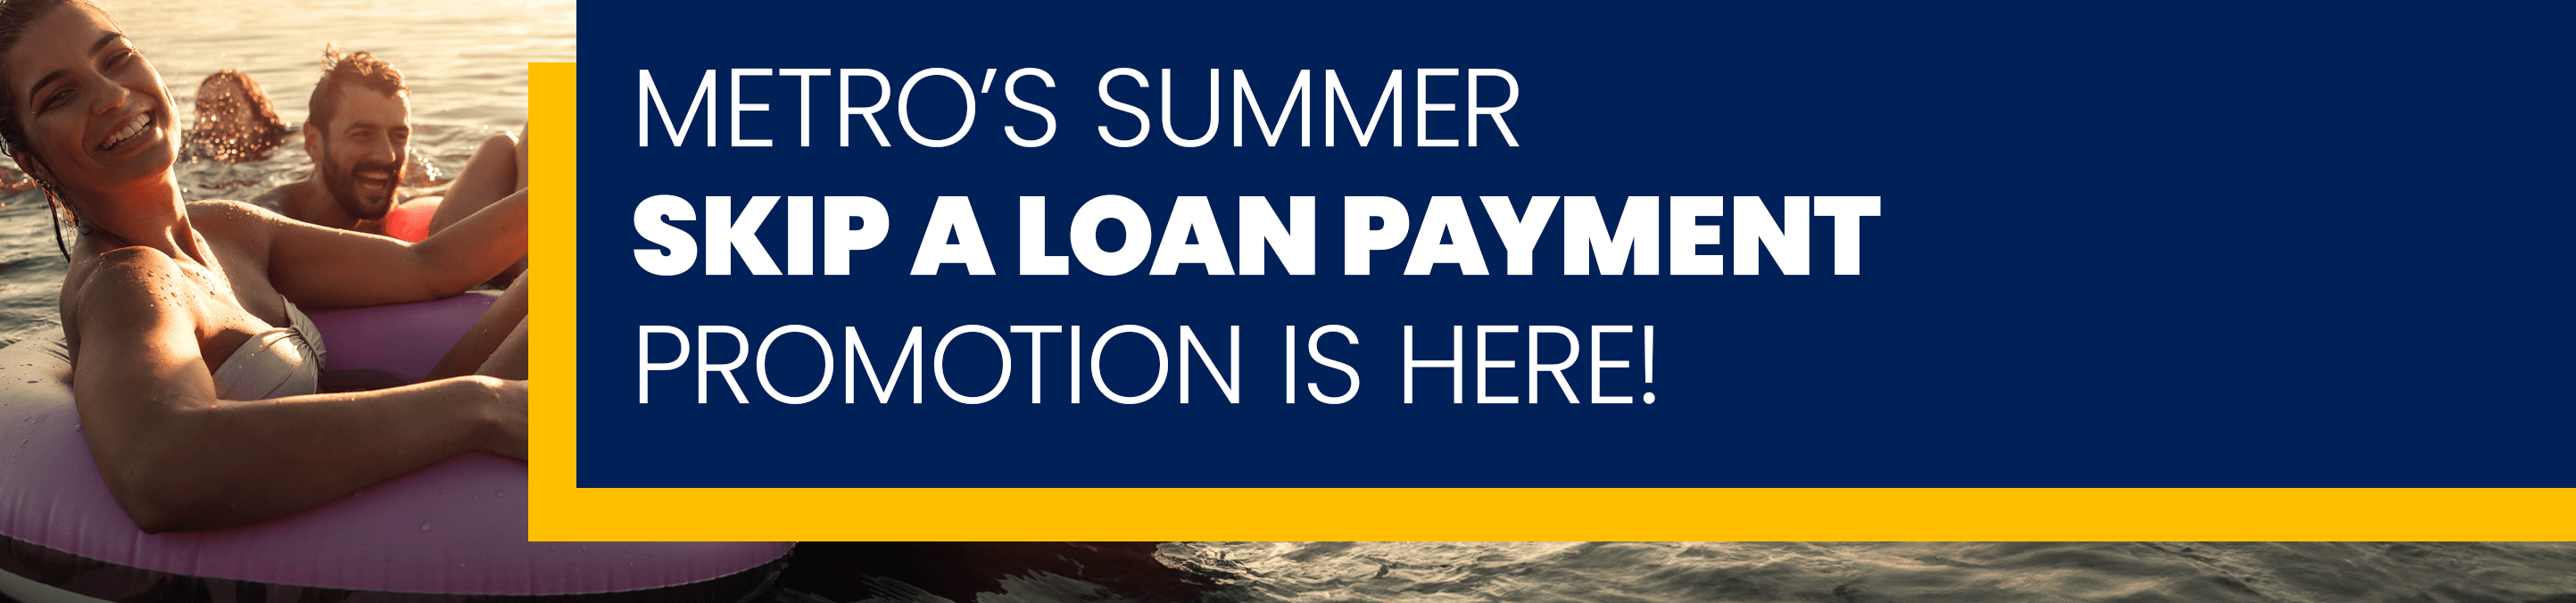 Metro's Summer Skip A Loan Payment Promotion Is Here!